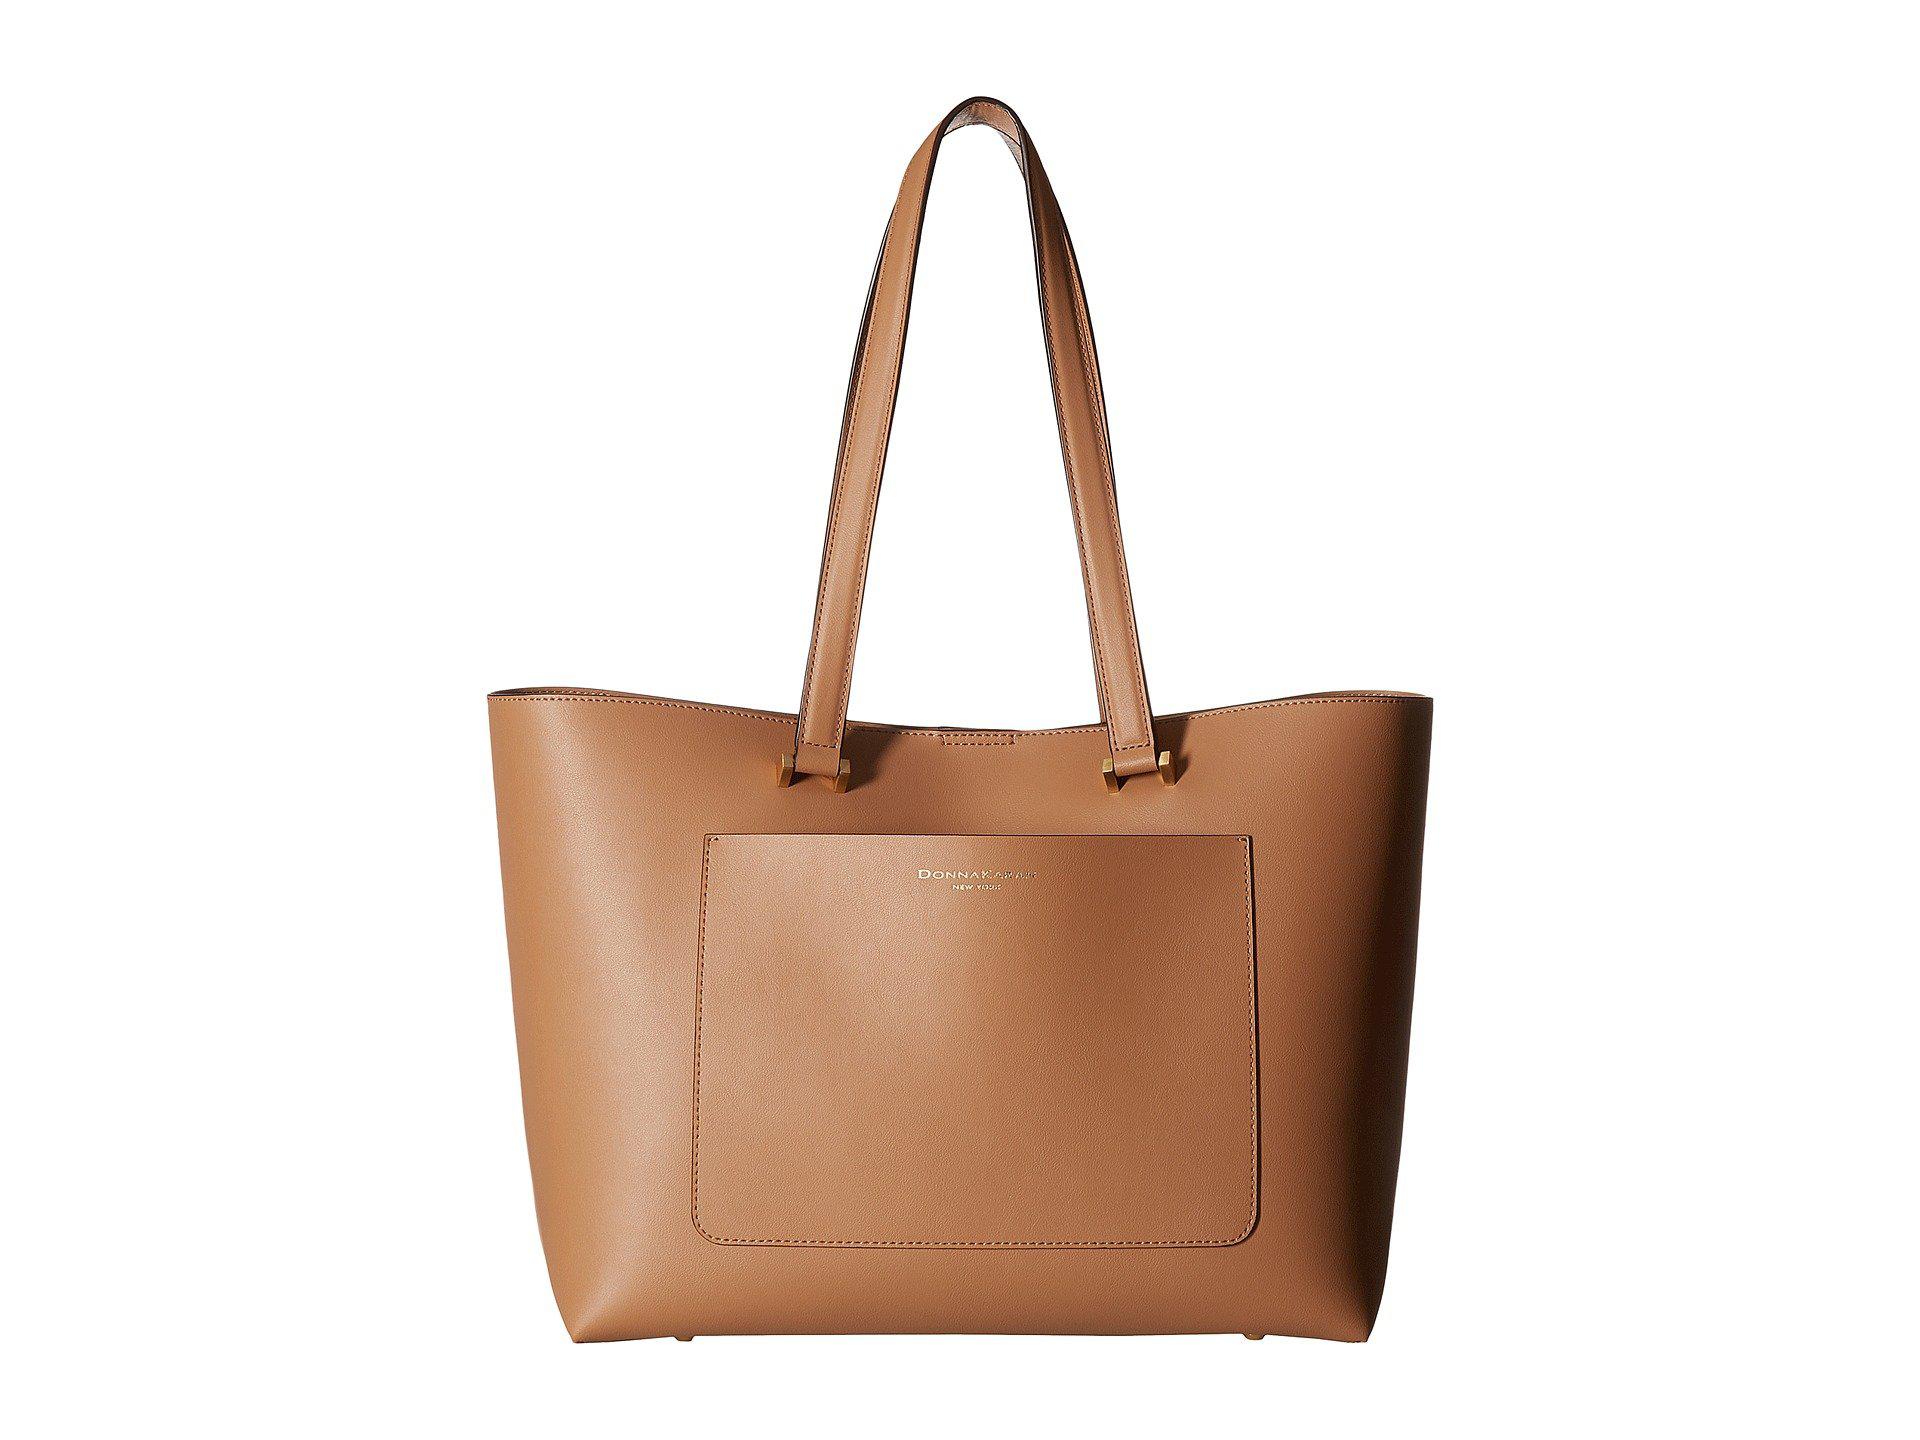 Donna Karan Leather Karla East/west Tote (soft Vicuna) Tote Handbags in  Brown - Lyst